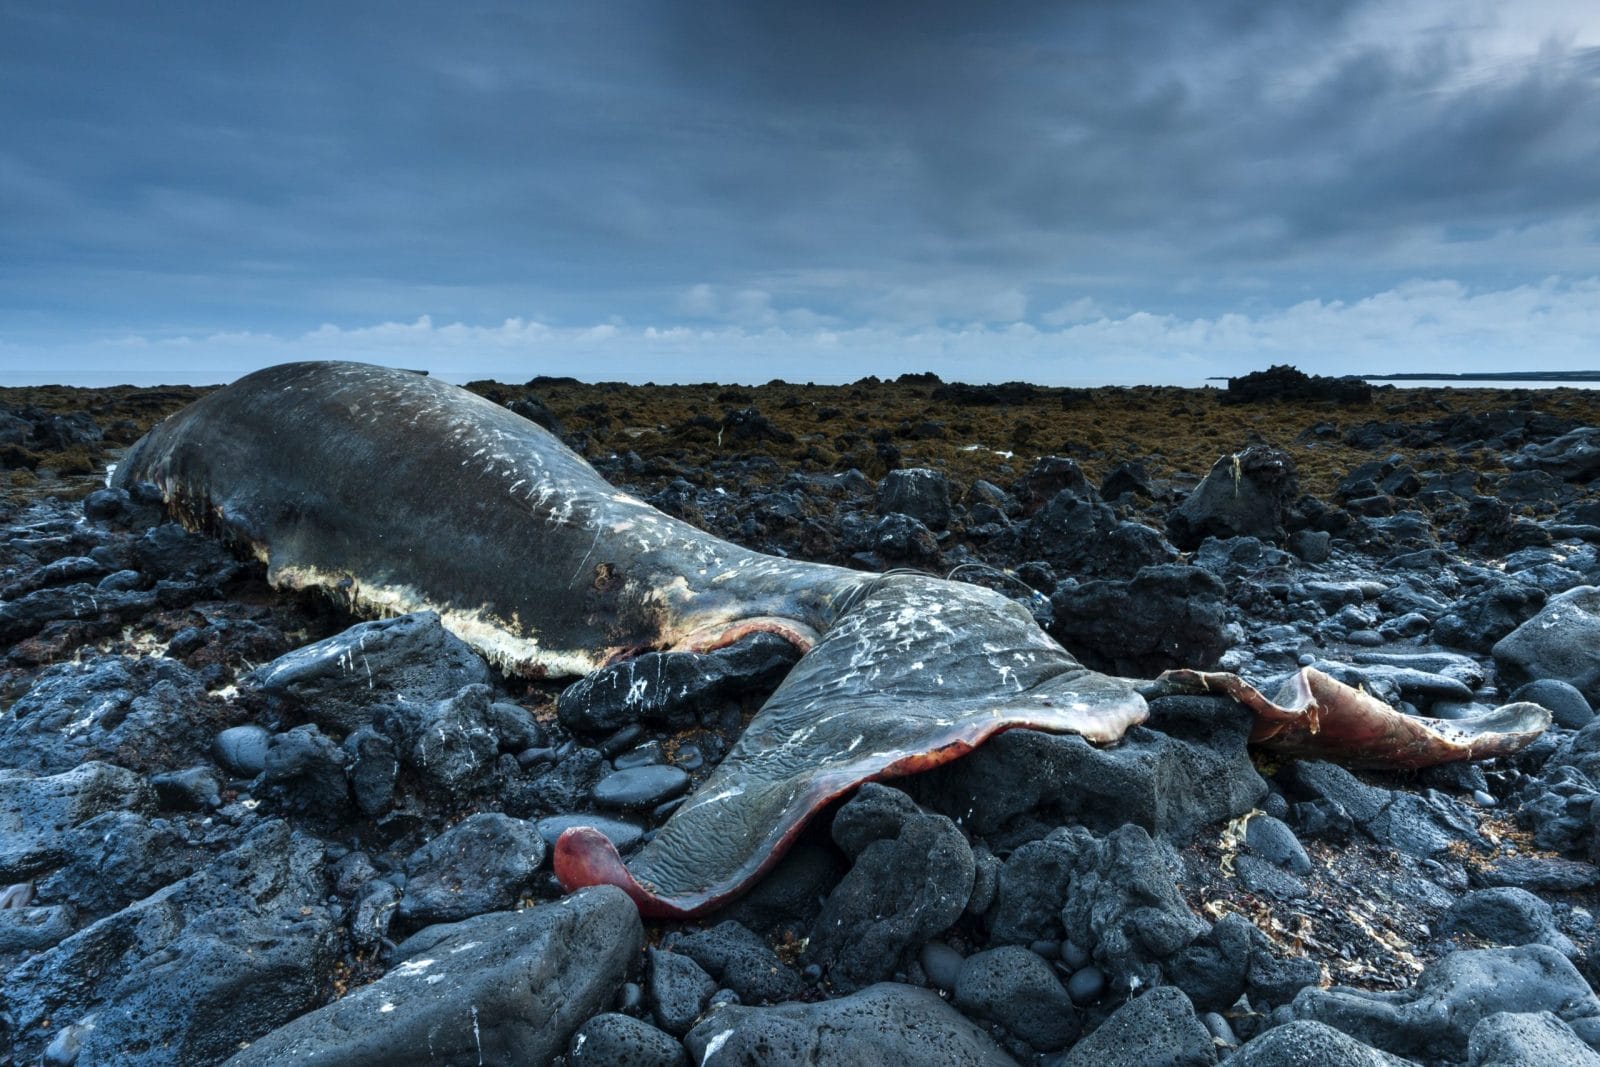 The body of a dead sperm whale